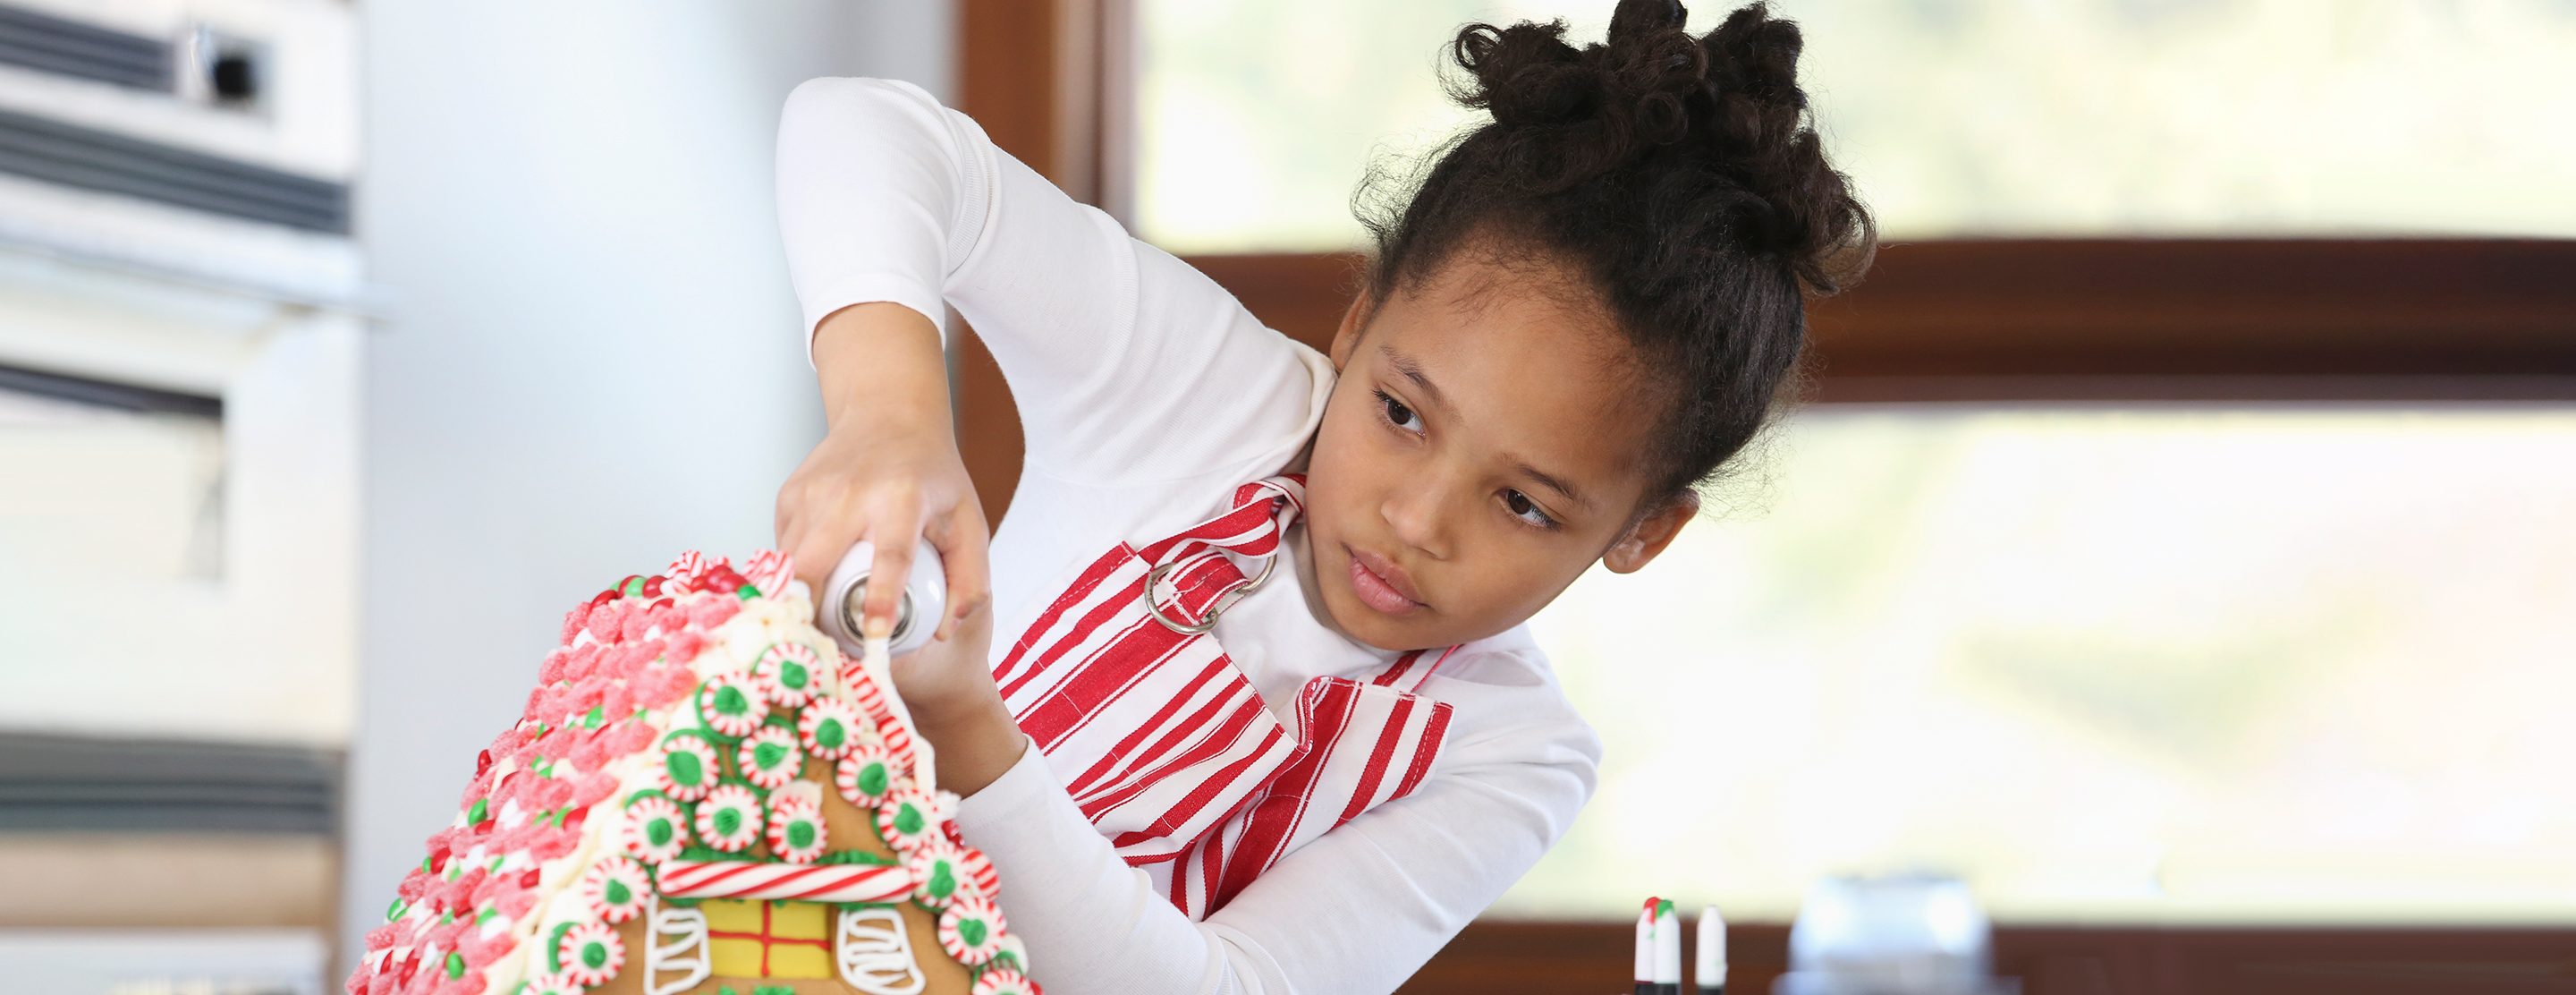 holiday-safety-tips-for-parents-2x